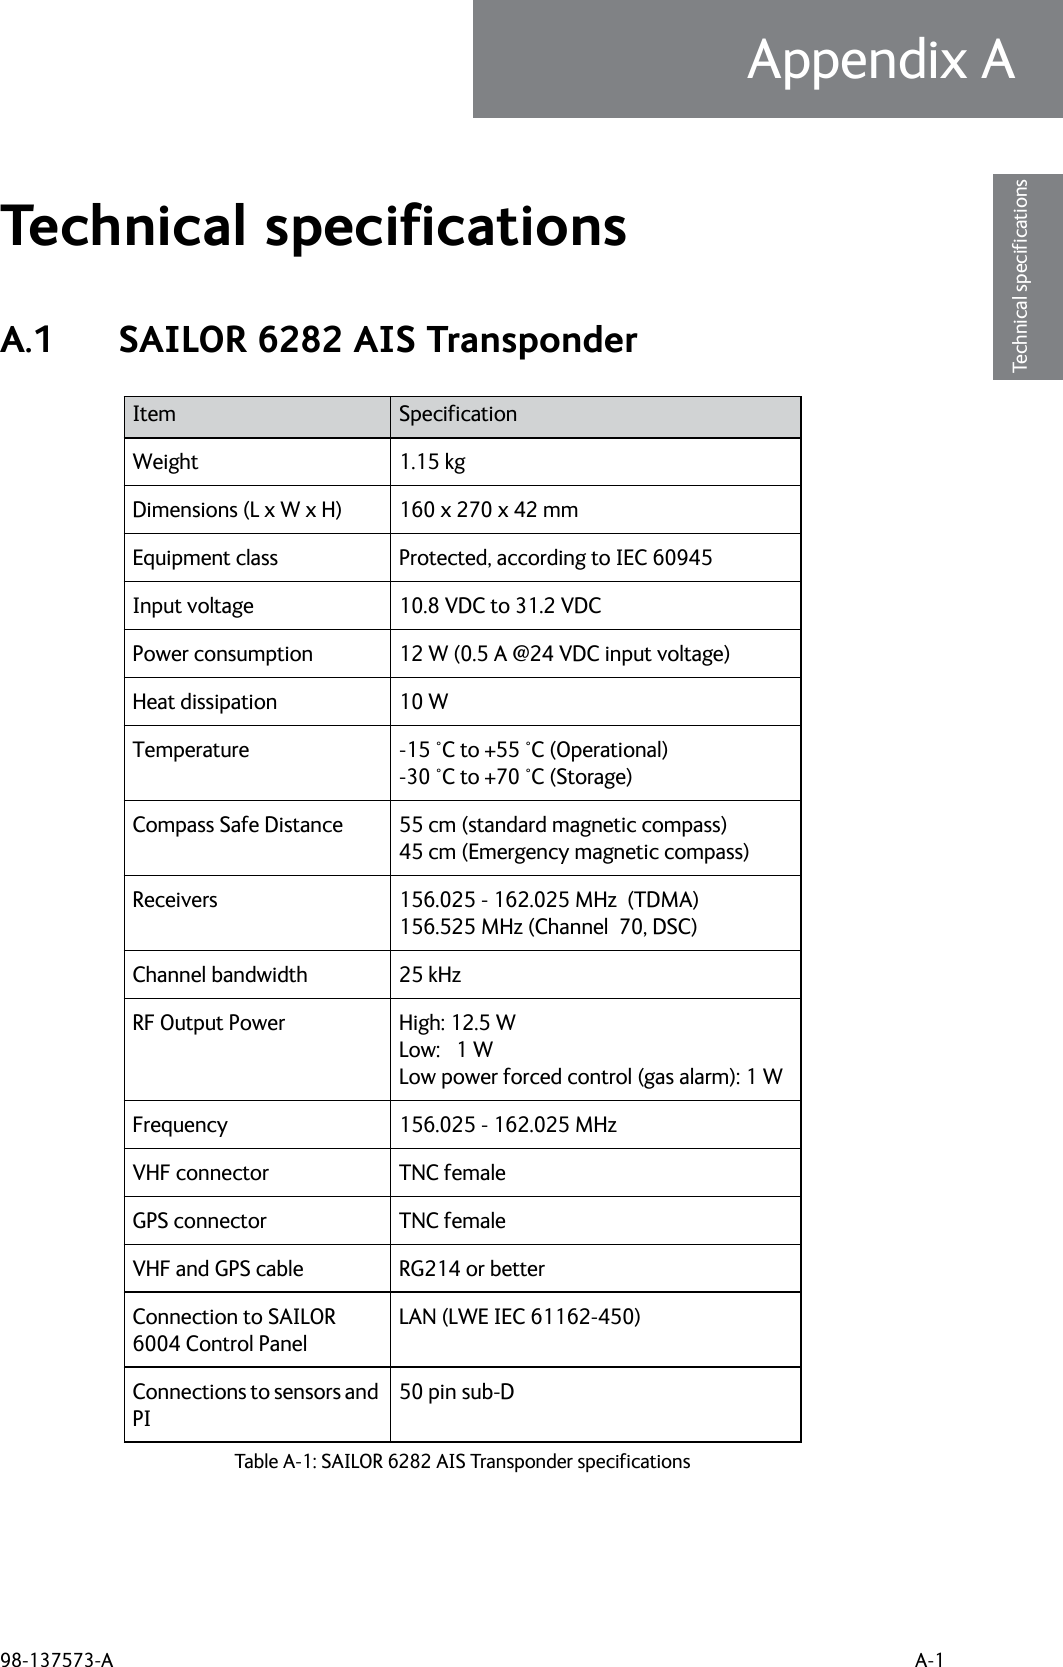 98-137573-A A-1Appendix AAAAATechnical specificationsTechnical specifications AA.1 SAILOR 6282 AIS TransponderItem SpecificationWeight 1.15 kgDimensions (L x W x H) 160 x 270 x 42 mmEquipment class Protected, according to IEC 60945Input voltage  10.8 VDC to 31.2 VDCPower consumption 12 W (0.5 A @24 VDC input voltage)Heat dissipation 10 WTemperature -15 °C to +55 °C (Operational) -30 °C to +70 °C (Storage)Compass Safe Distance 55 cm (standard magnetic compass) 45 cm (Emergency magnetic compass)Receivers 156.025 - 162.025 MHz  (TDMA)156.525 MHz (Channel  70, DSC)Channel bandwidth 25 kHzRF Output Power High: 12.5 W Low:   1 W Low power forced control (gas alarm): 1 WFrequency 156.025 - 162.025 MHzVHF connector TNC femaleGPS connector TNC femaleVHF and GPS cable RG214 or betterConnection to SAILOR 6004 Control PanelLAN (LWE IEC 61162-450)Connections to sensors and PI50 pin sub-DTable A-1: SAILOR 6282 AIS Transponder specifications